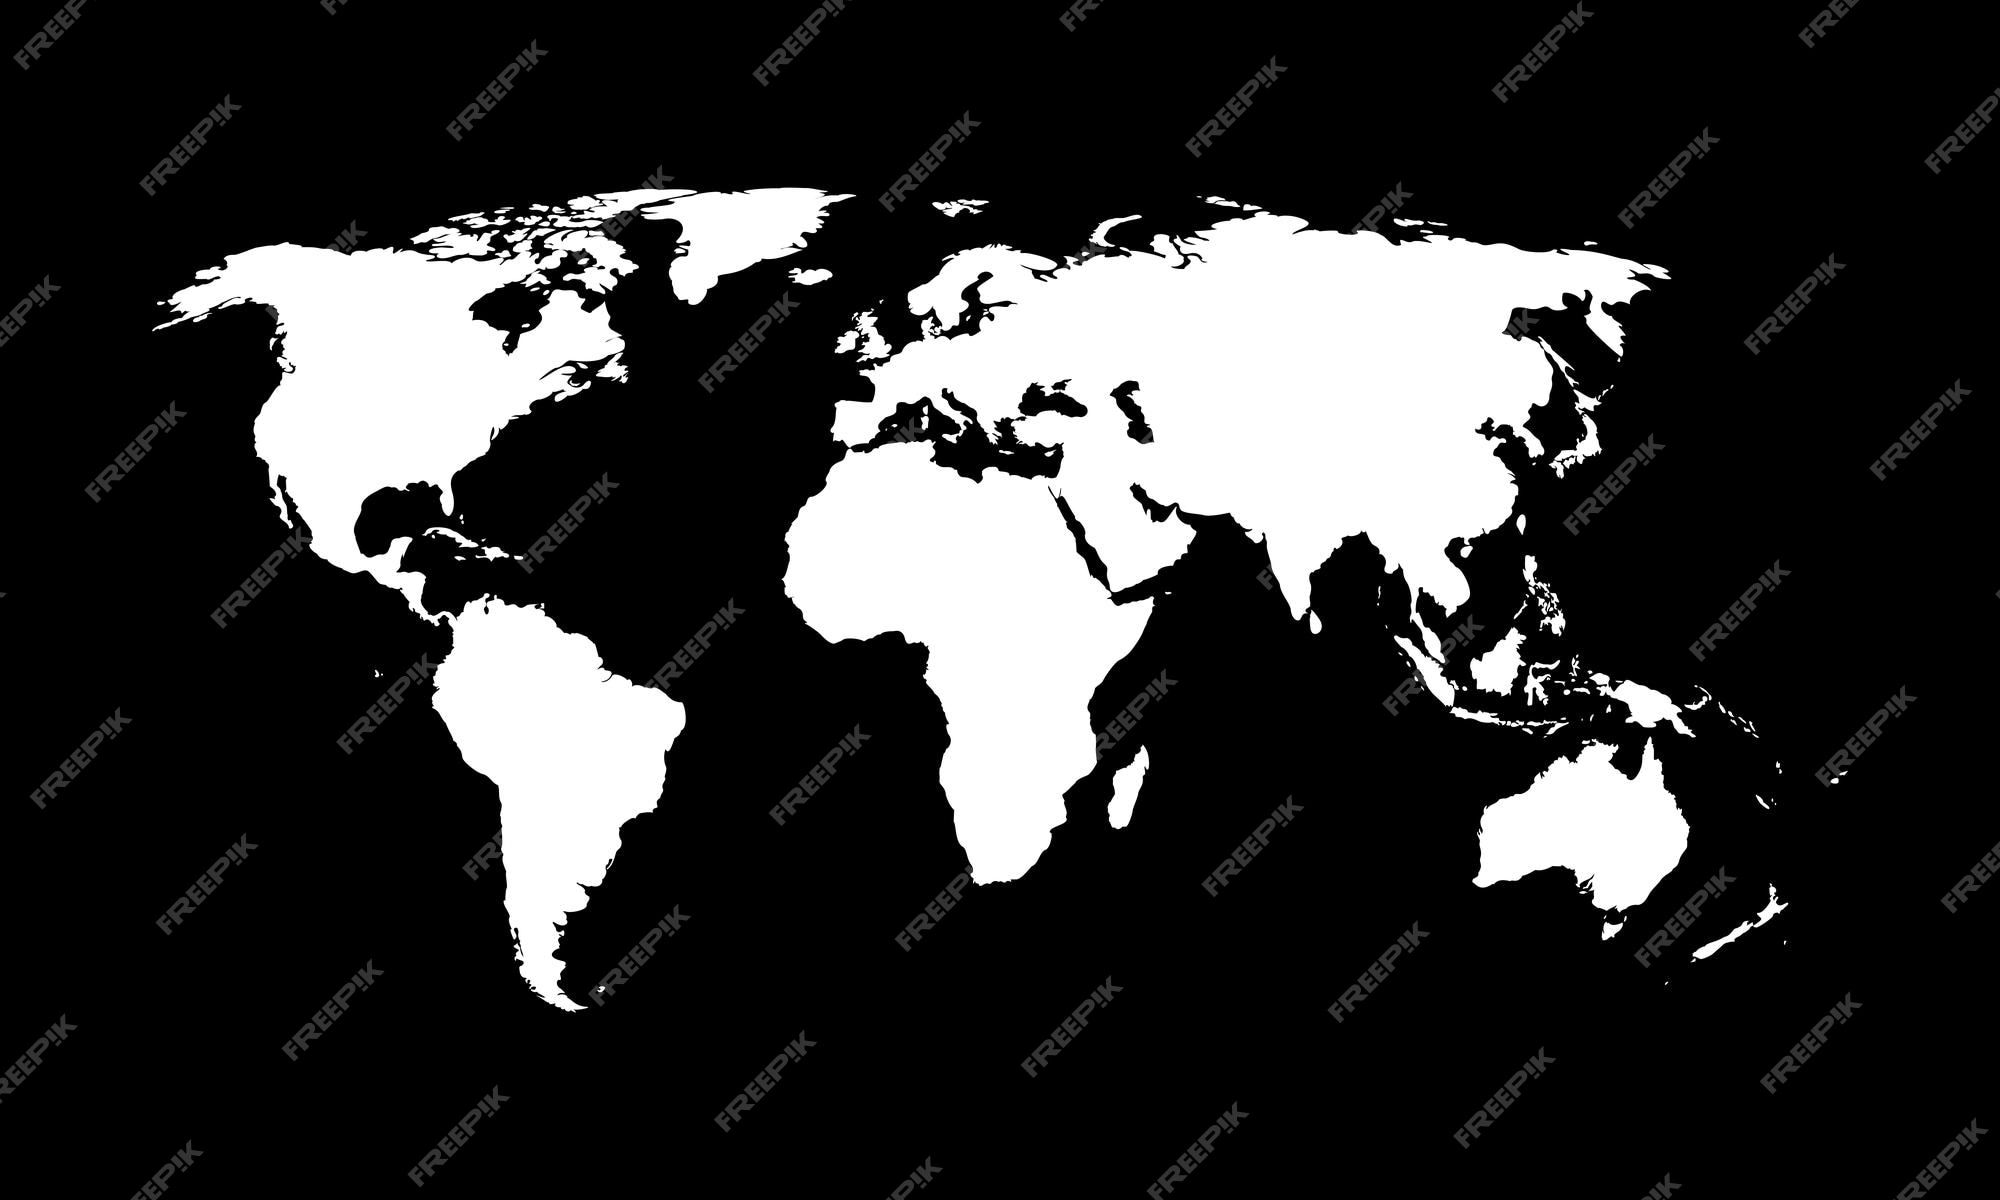 Premium Vector | World map vector black and white texture